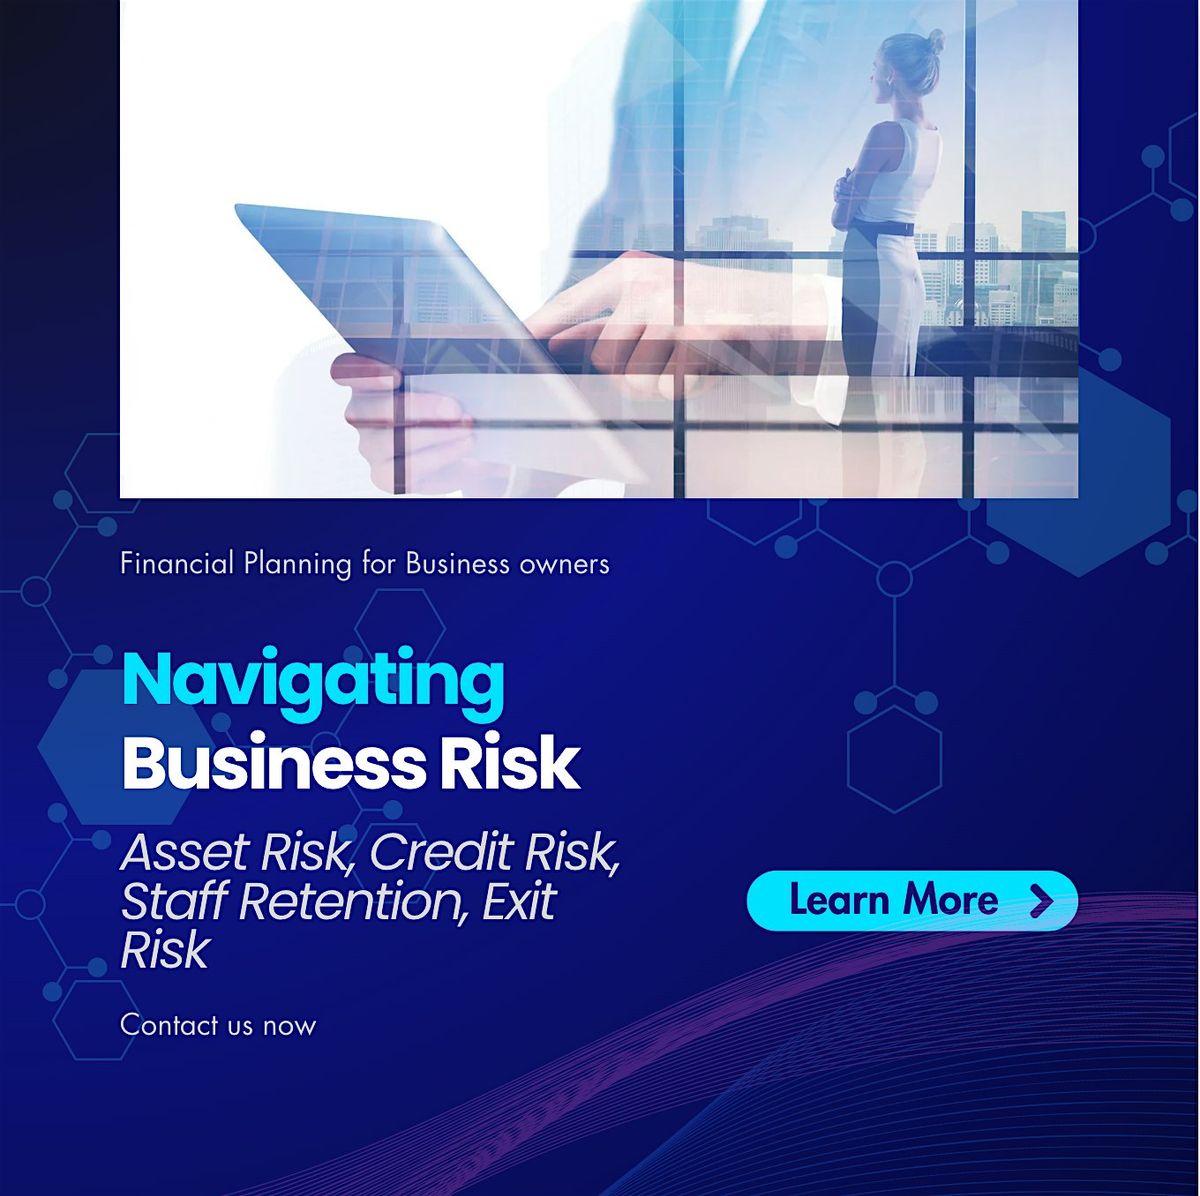 Managing Business Risk for Business Owners